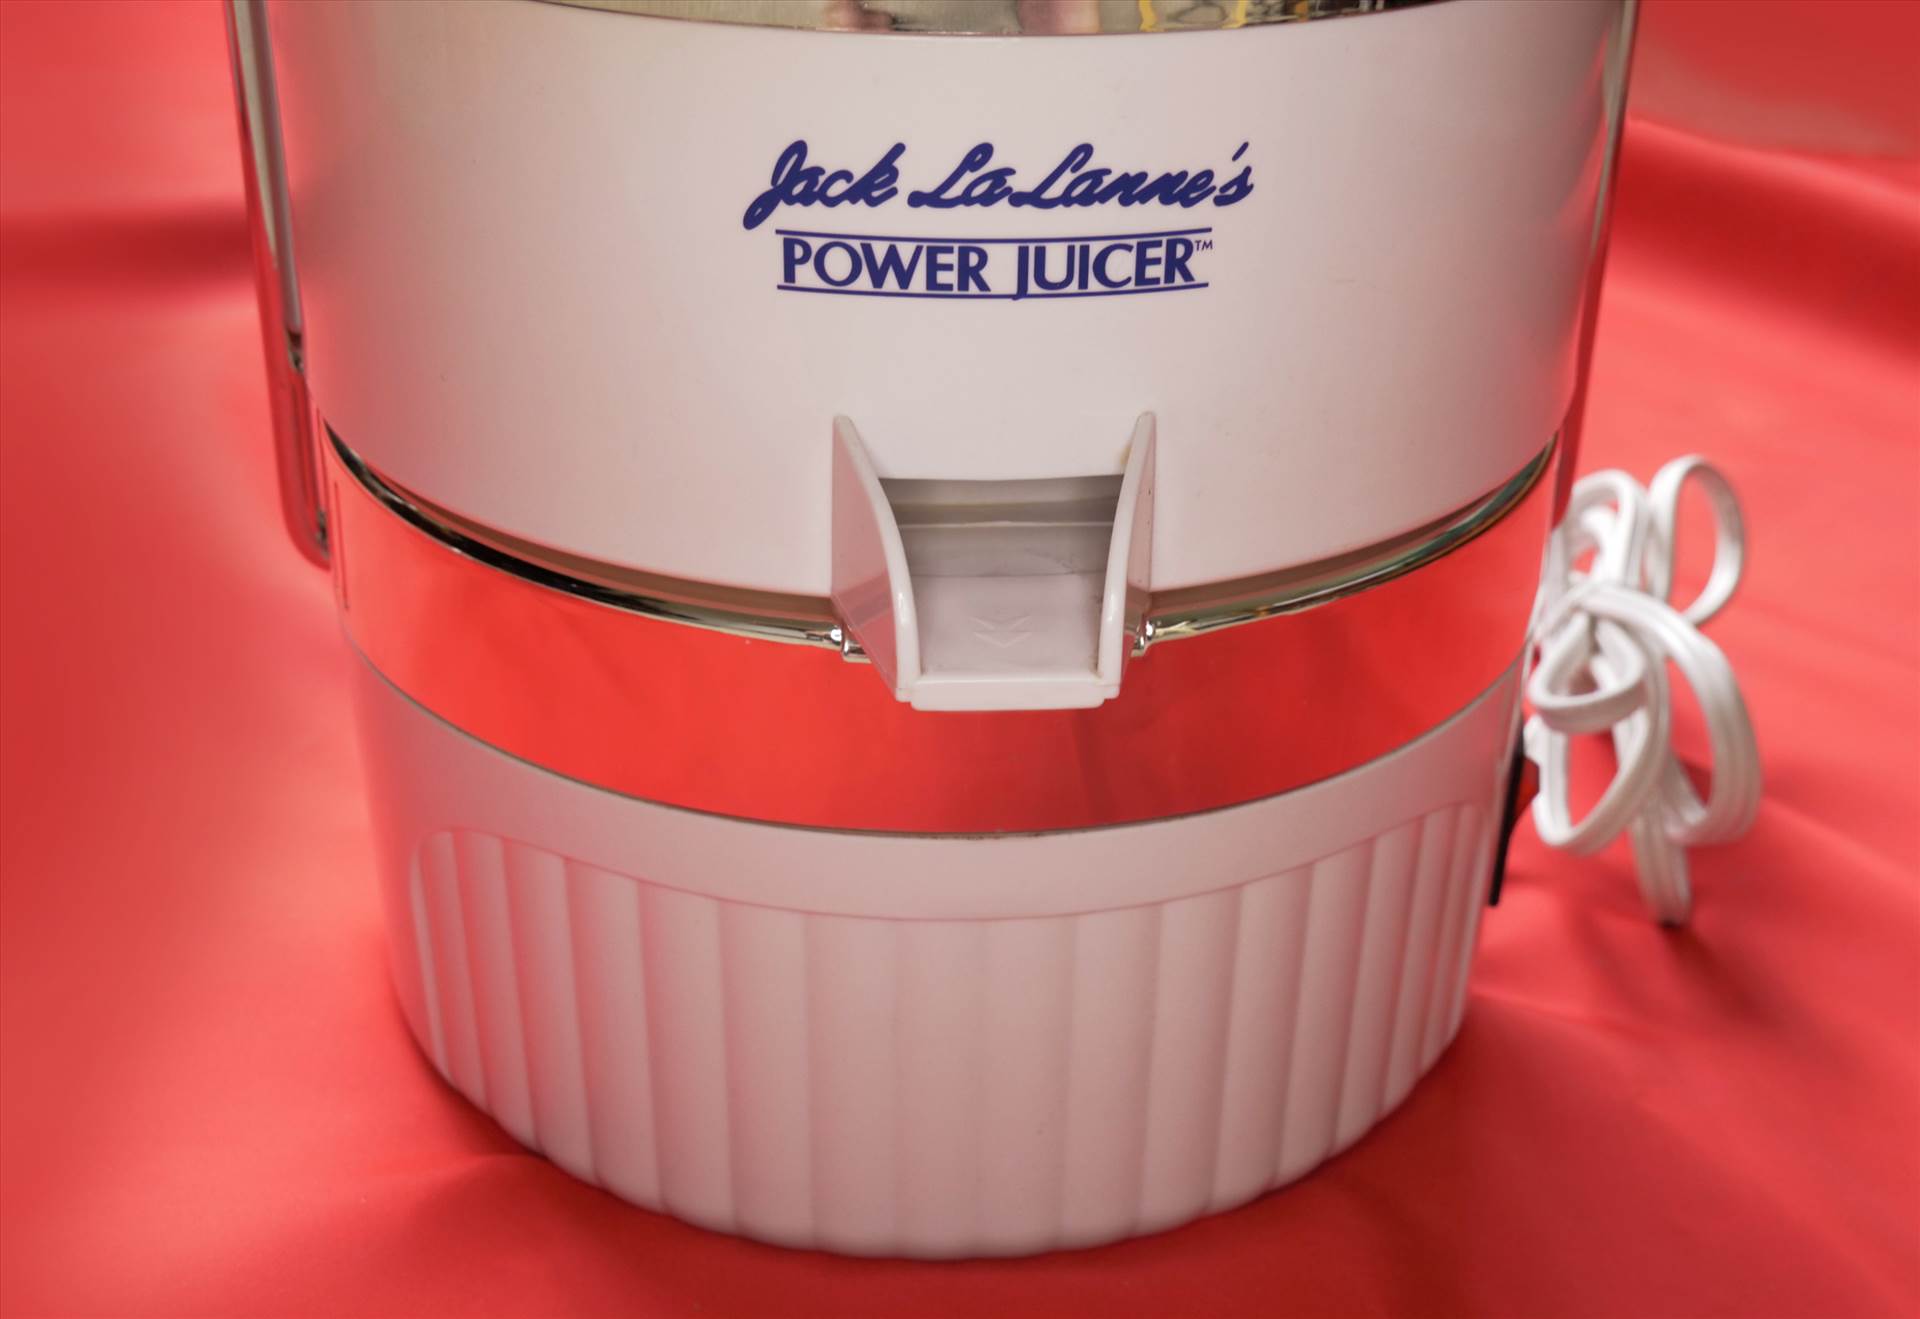 JUICER_2.jpg  by pictureitnow